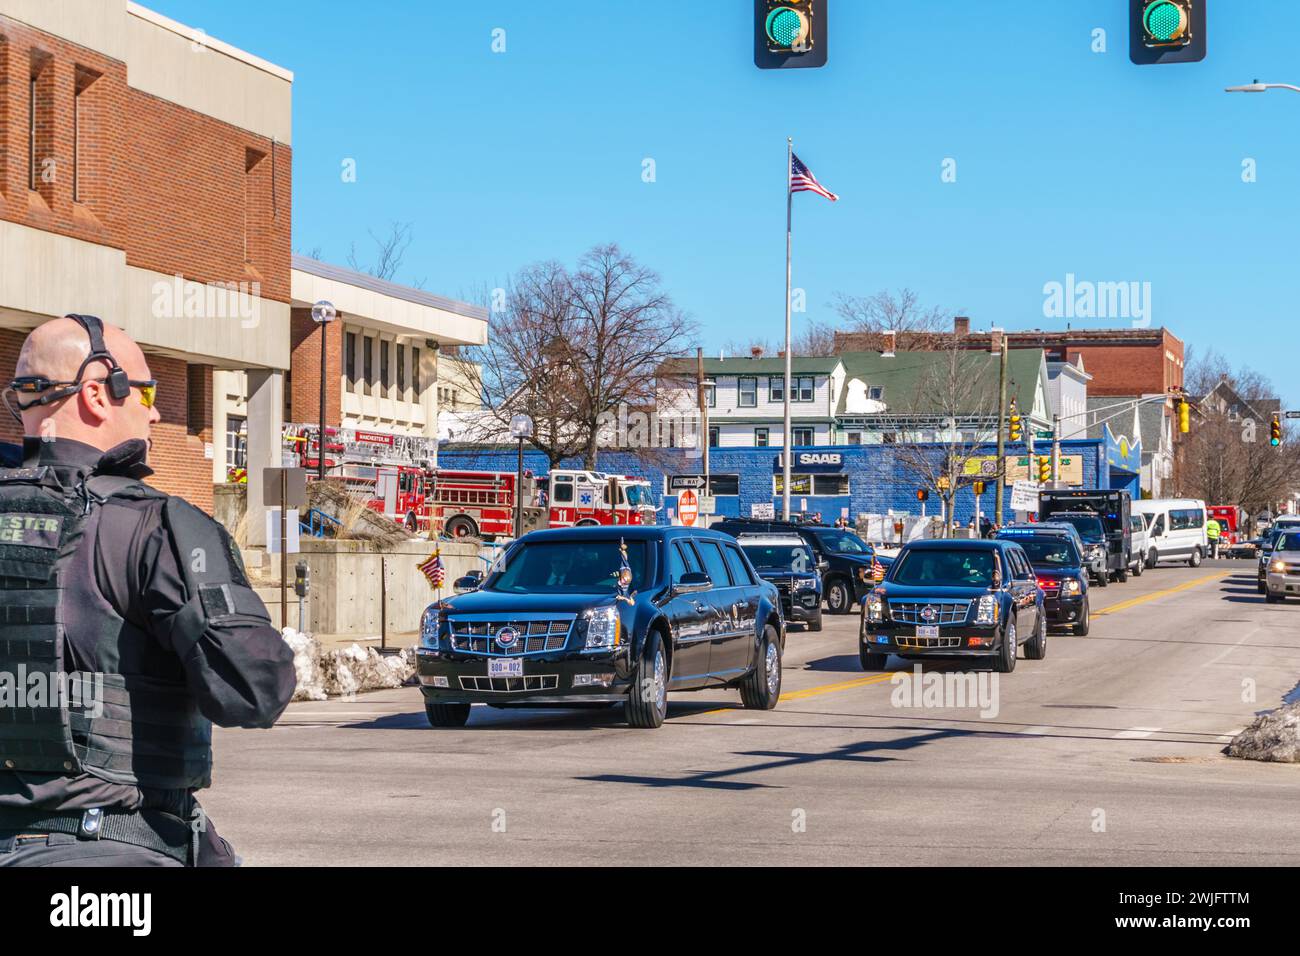 Manchester, NH/US-March 19, 2018: Police officer watches President Donald Trump's motorcade near fire station after giving speech on opioid epidemic. Stock Photo